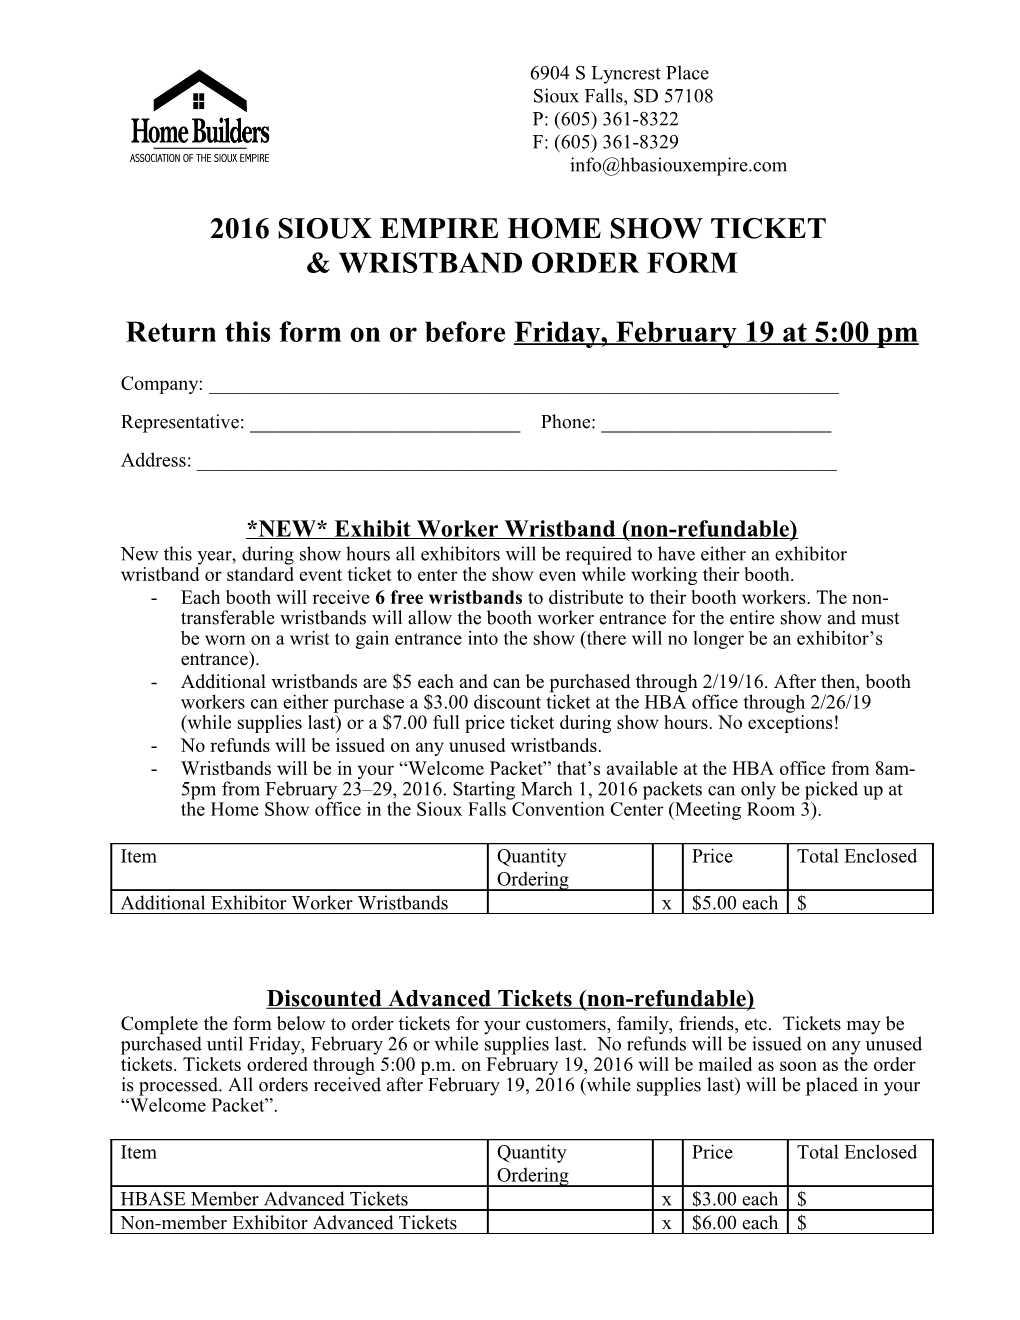 2016 Sioux Empire Home Show Ticket